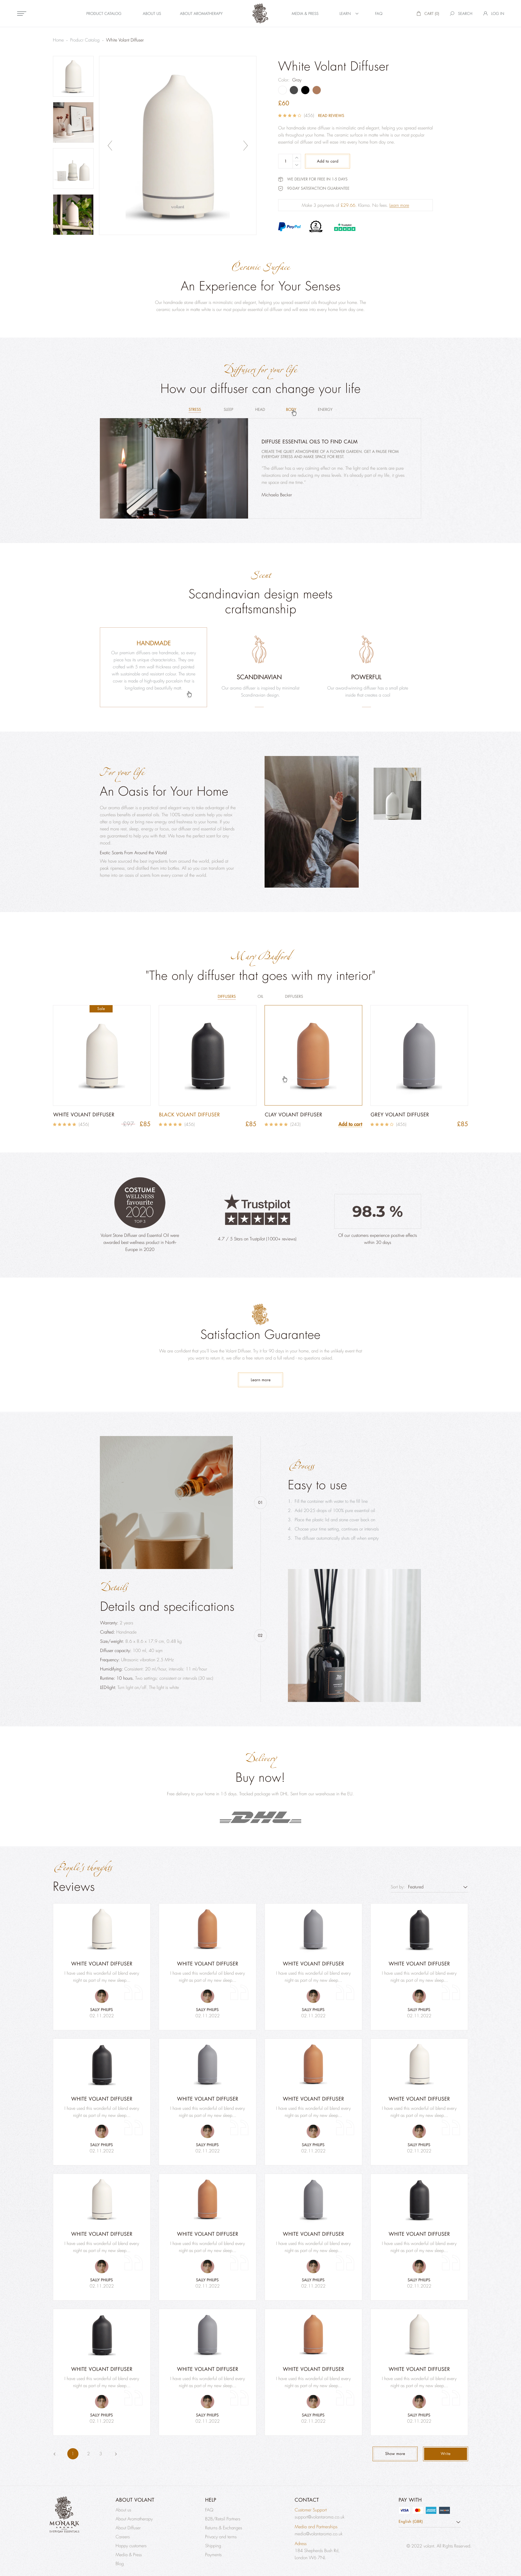 Monark-aroma_03_Diffuser_Product_Page_0.1